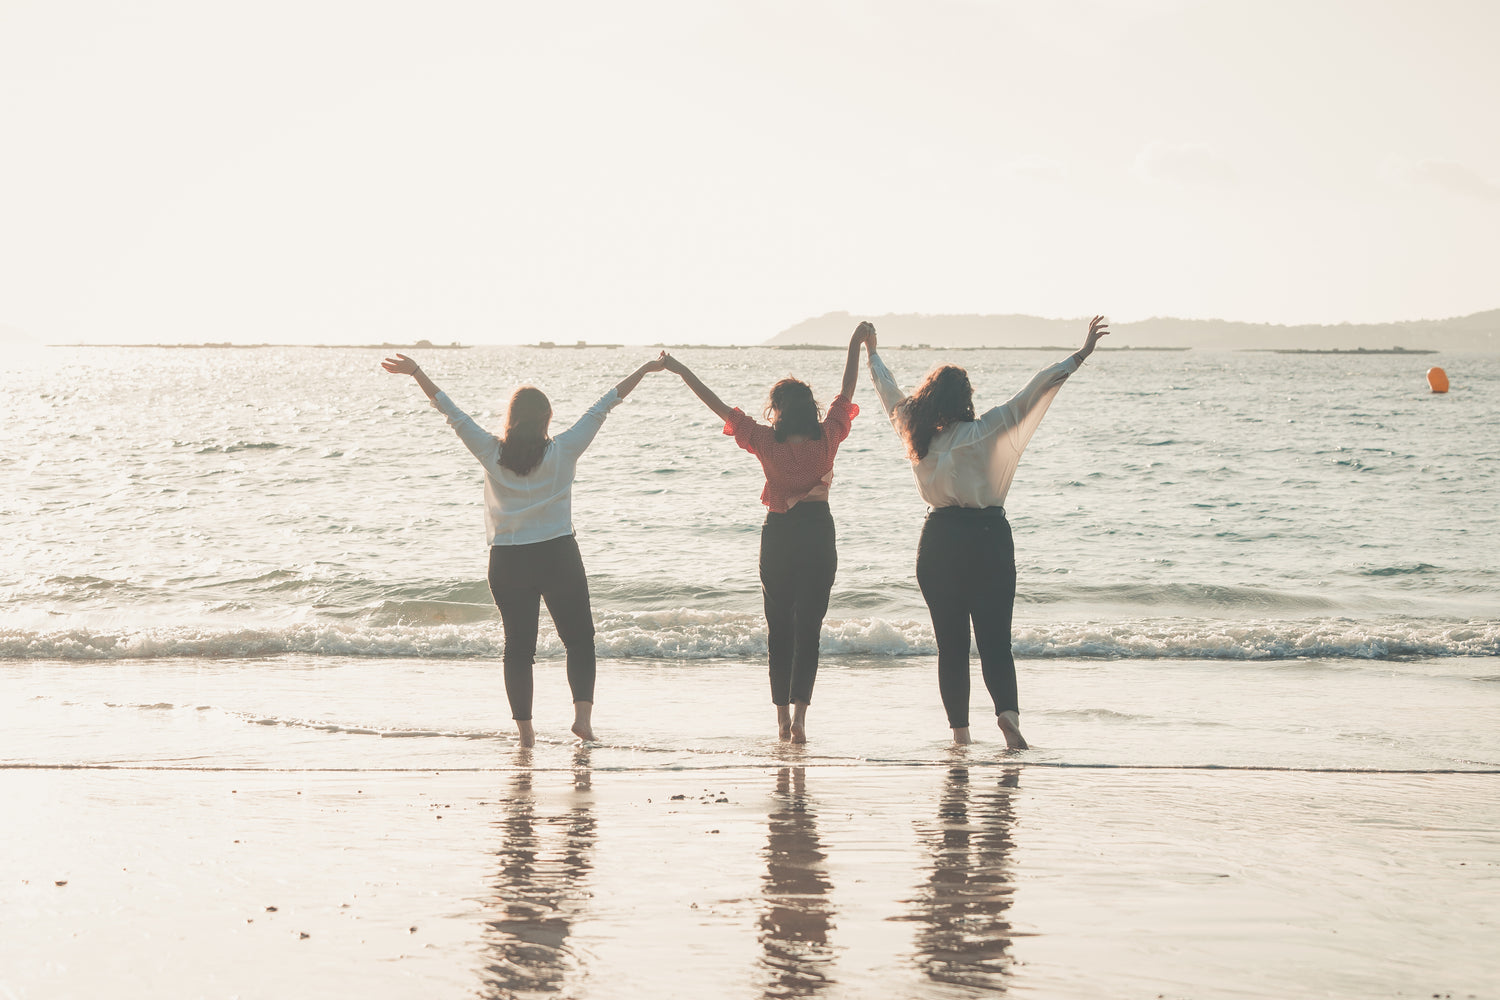 Background image of Our Trinity Reside Living page showing three women together on a beach